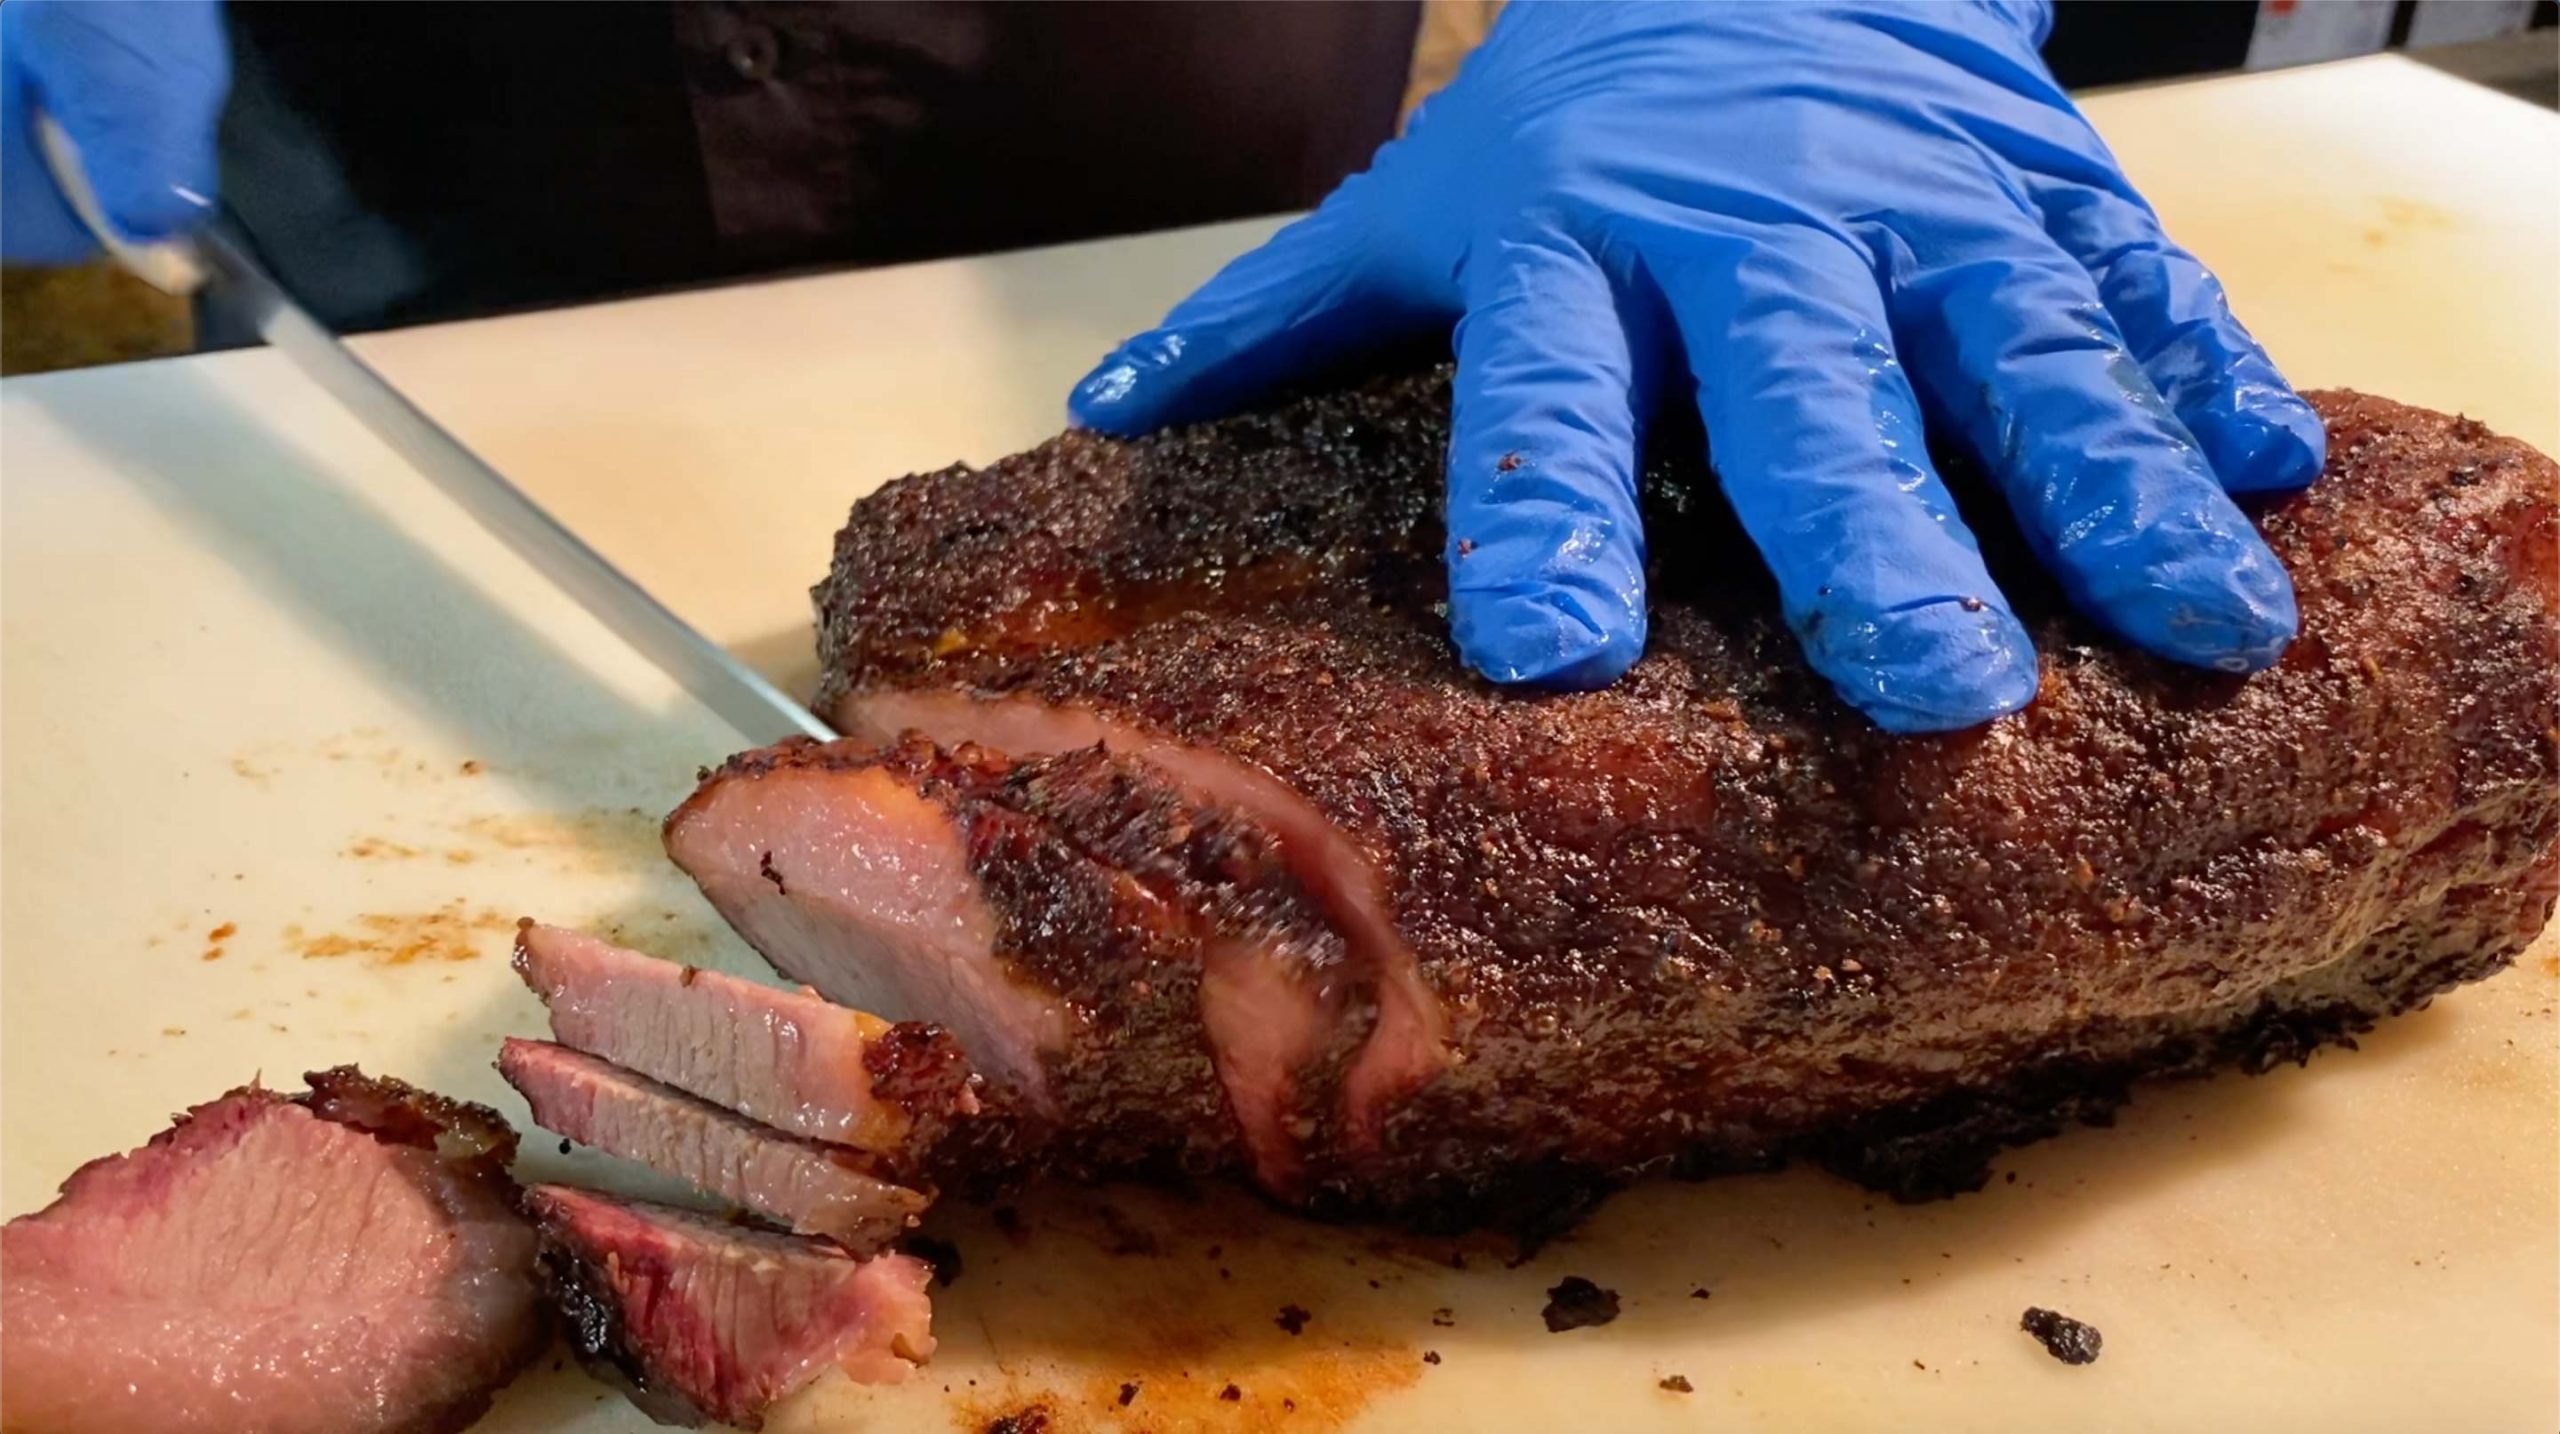 How to cut a brisket - an image of brisket cutting